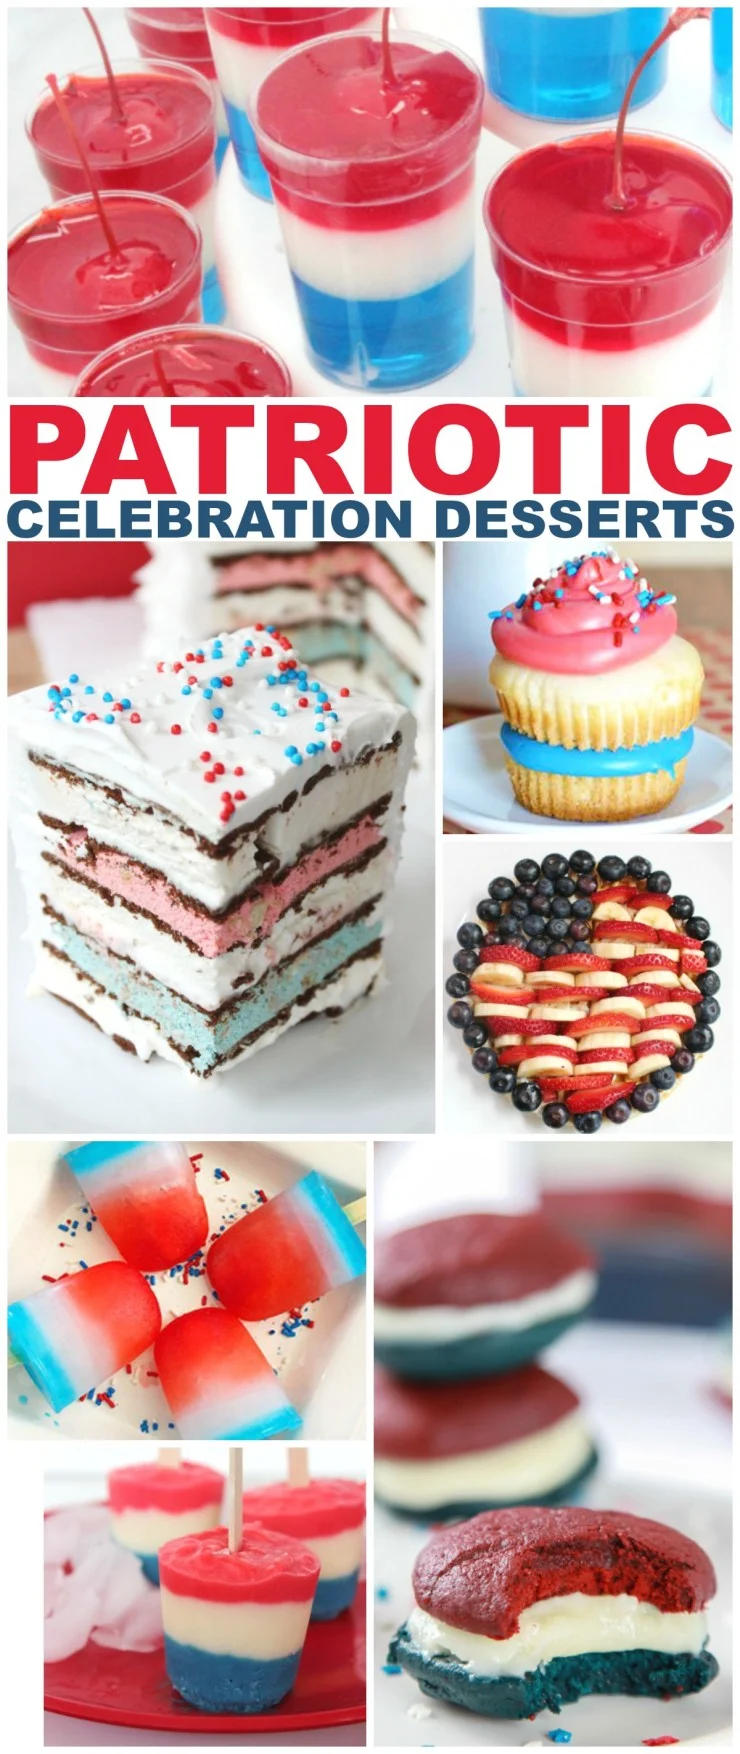 If you are looking for patriotic desserts this summer, I've got a recipe or two that you can whip up in your kitchen and impress your guests when entertaining at any summer cookout this year. 